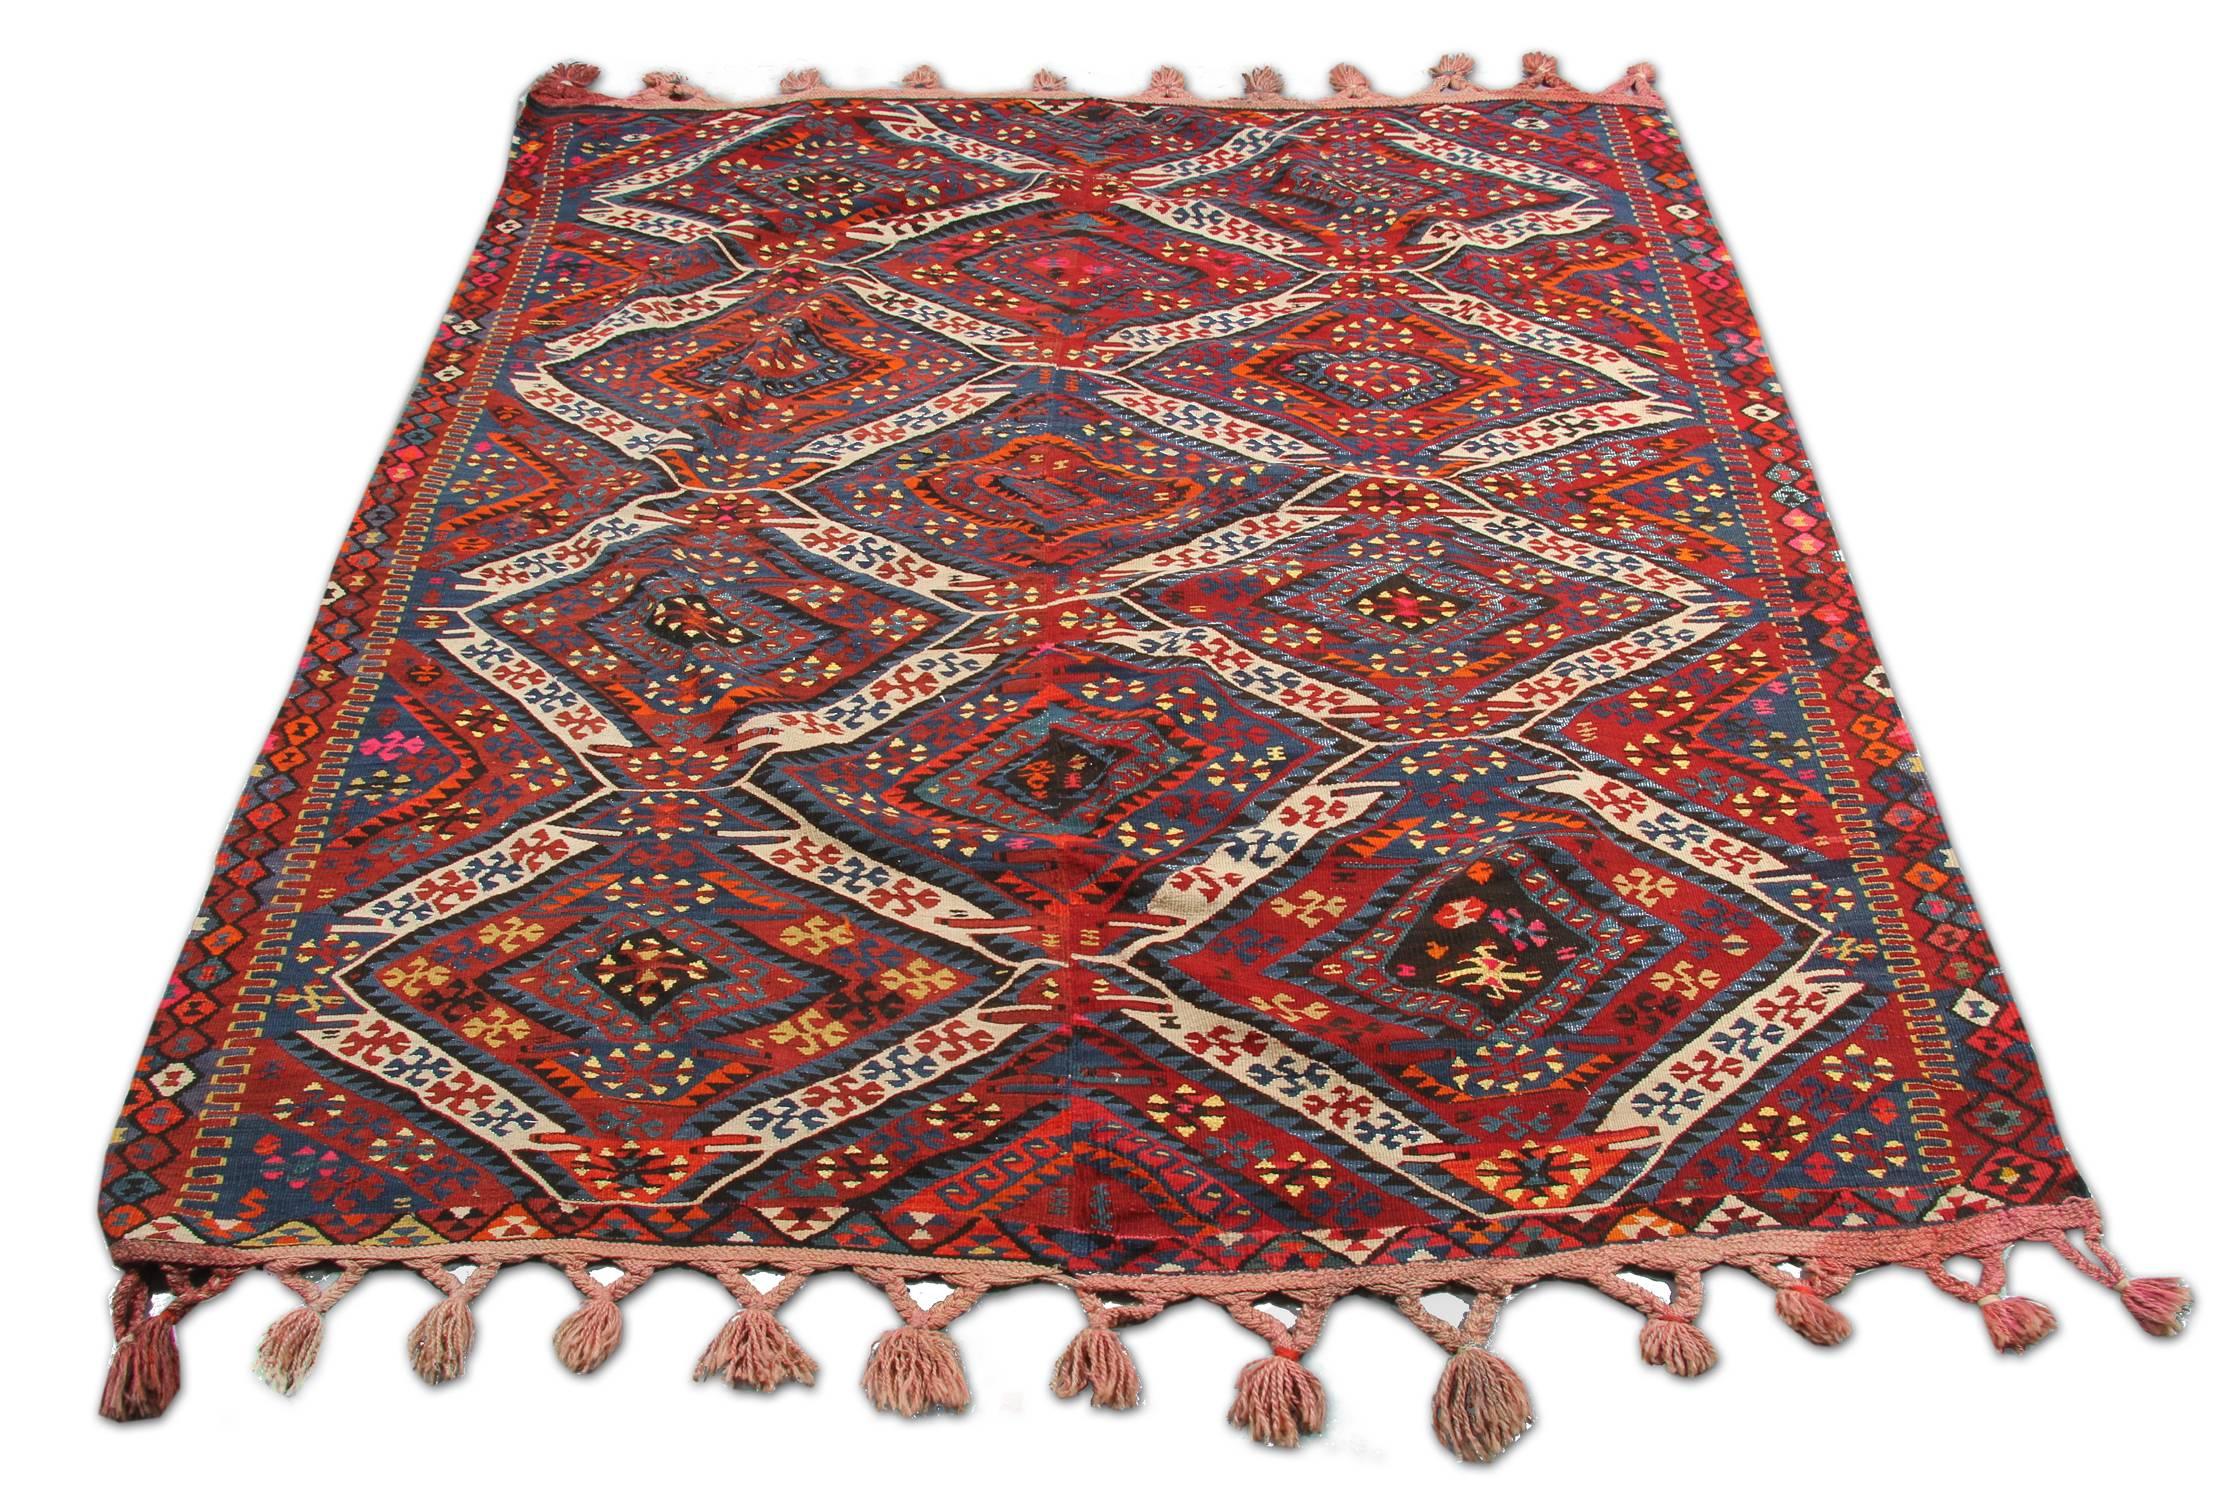 Very nice handwoven antique Turkish kilim rugs, it has the very nice color combination and has some metal spun wool on it, this kilim rug comes from Anatolia in 19th century and it is a very good match with traditional decoration as well. This